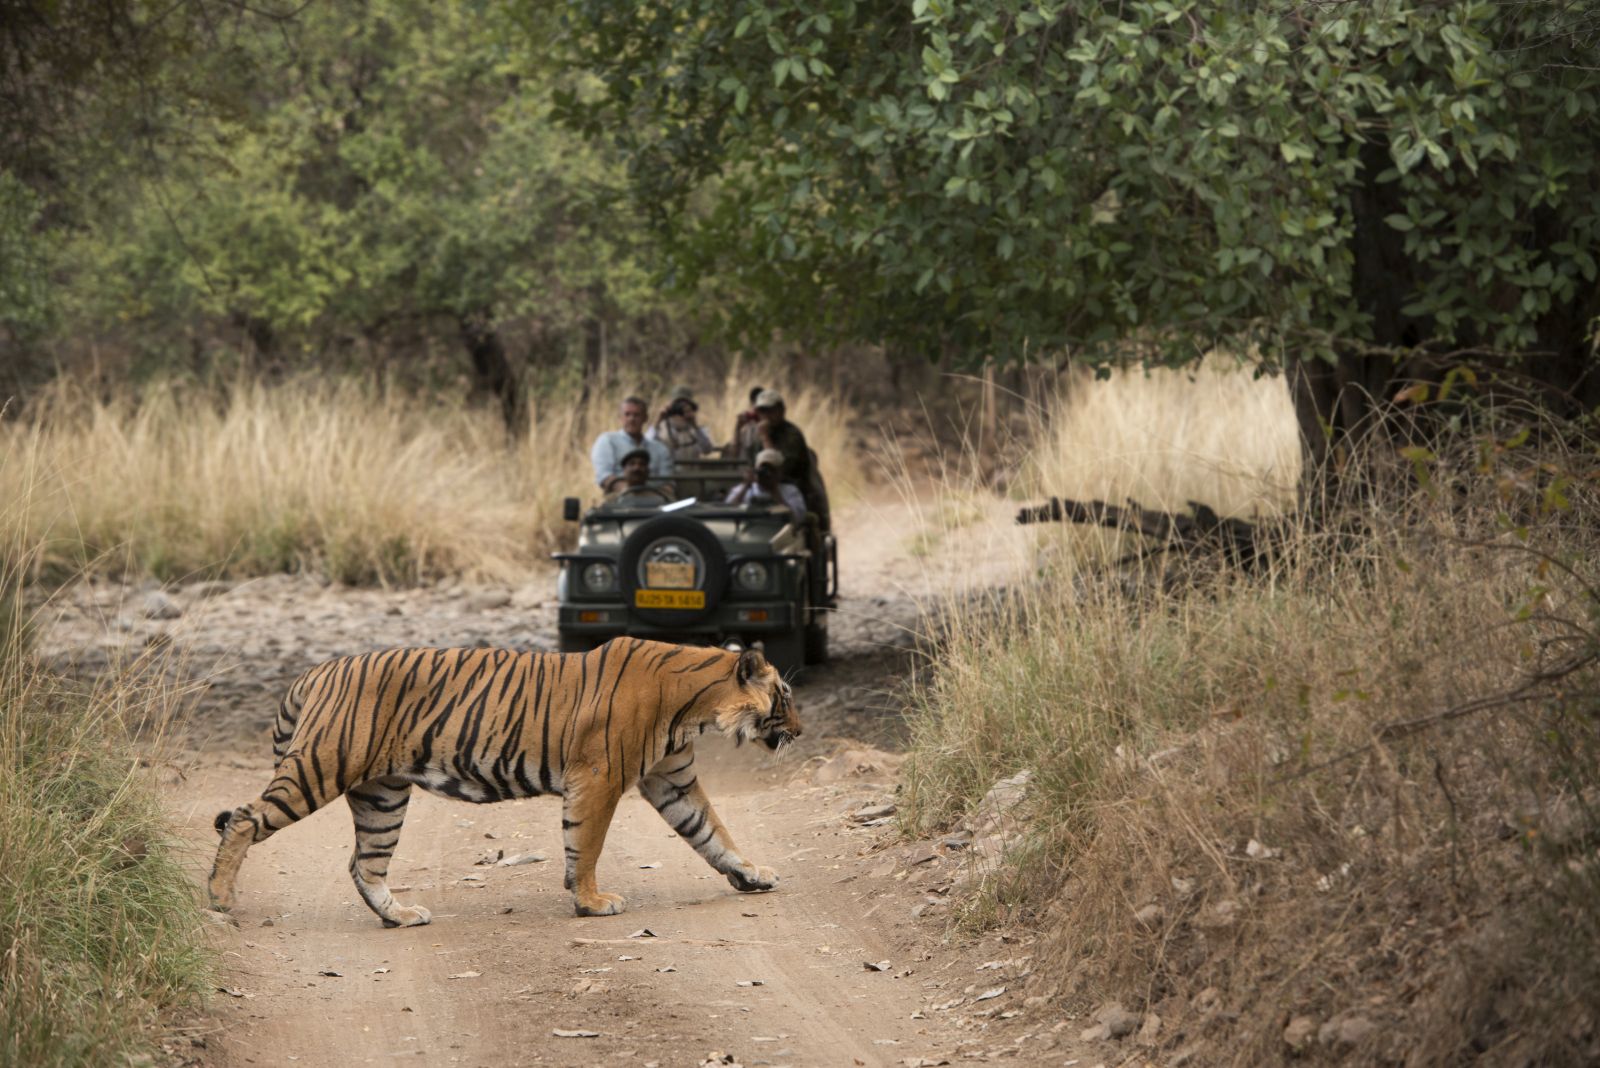 Tiger safari at the Sujan Sher Bagh luxury camp in India